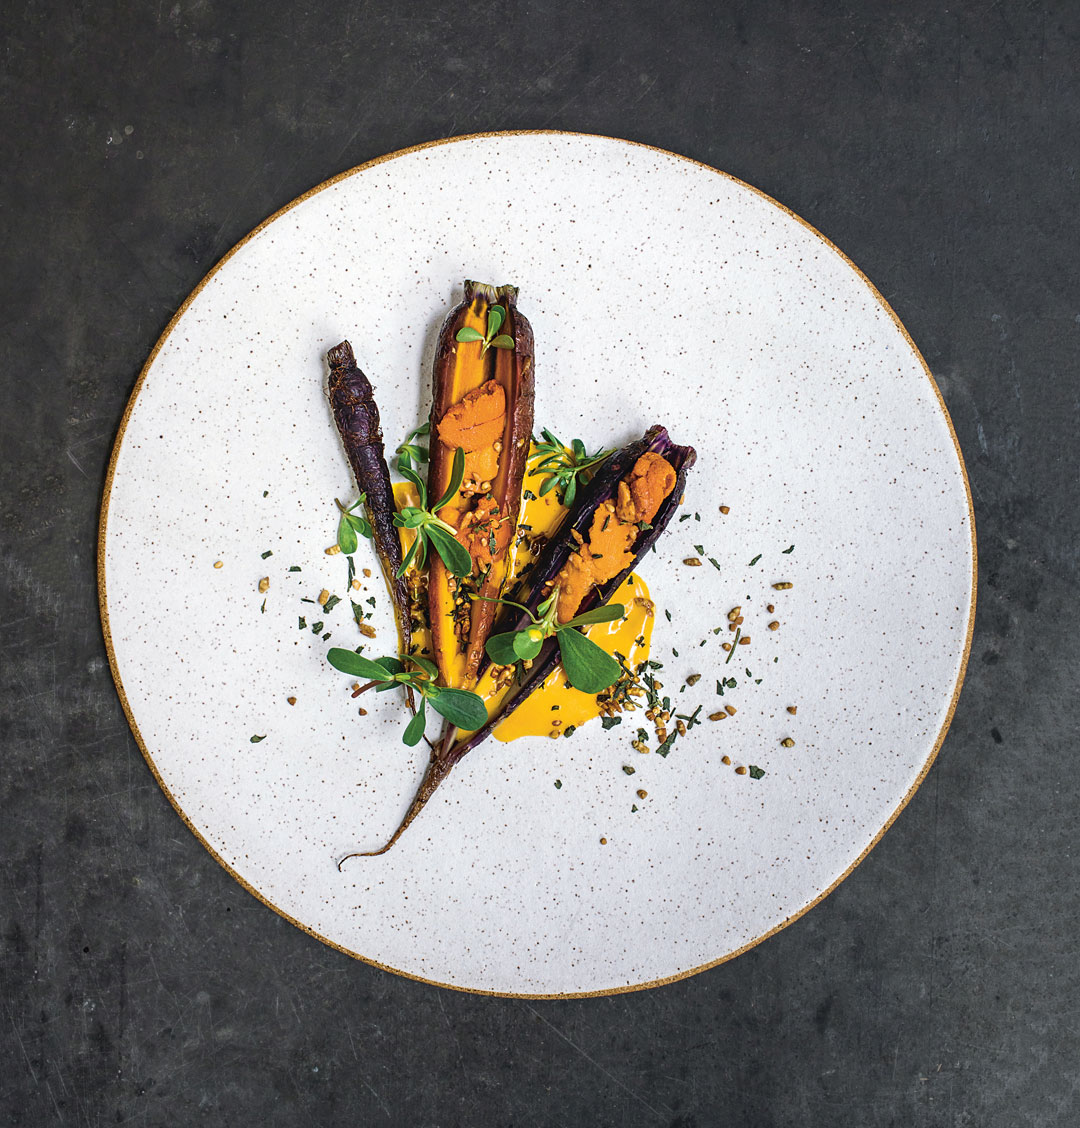 Carrot, Uni, Genmaicha, from A Very Serious Cookbook. Photography by Matty Yangwoo Kim. All ceramics by Noble Plateware